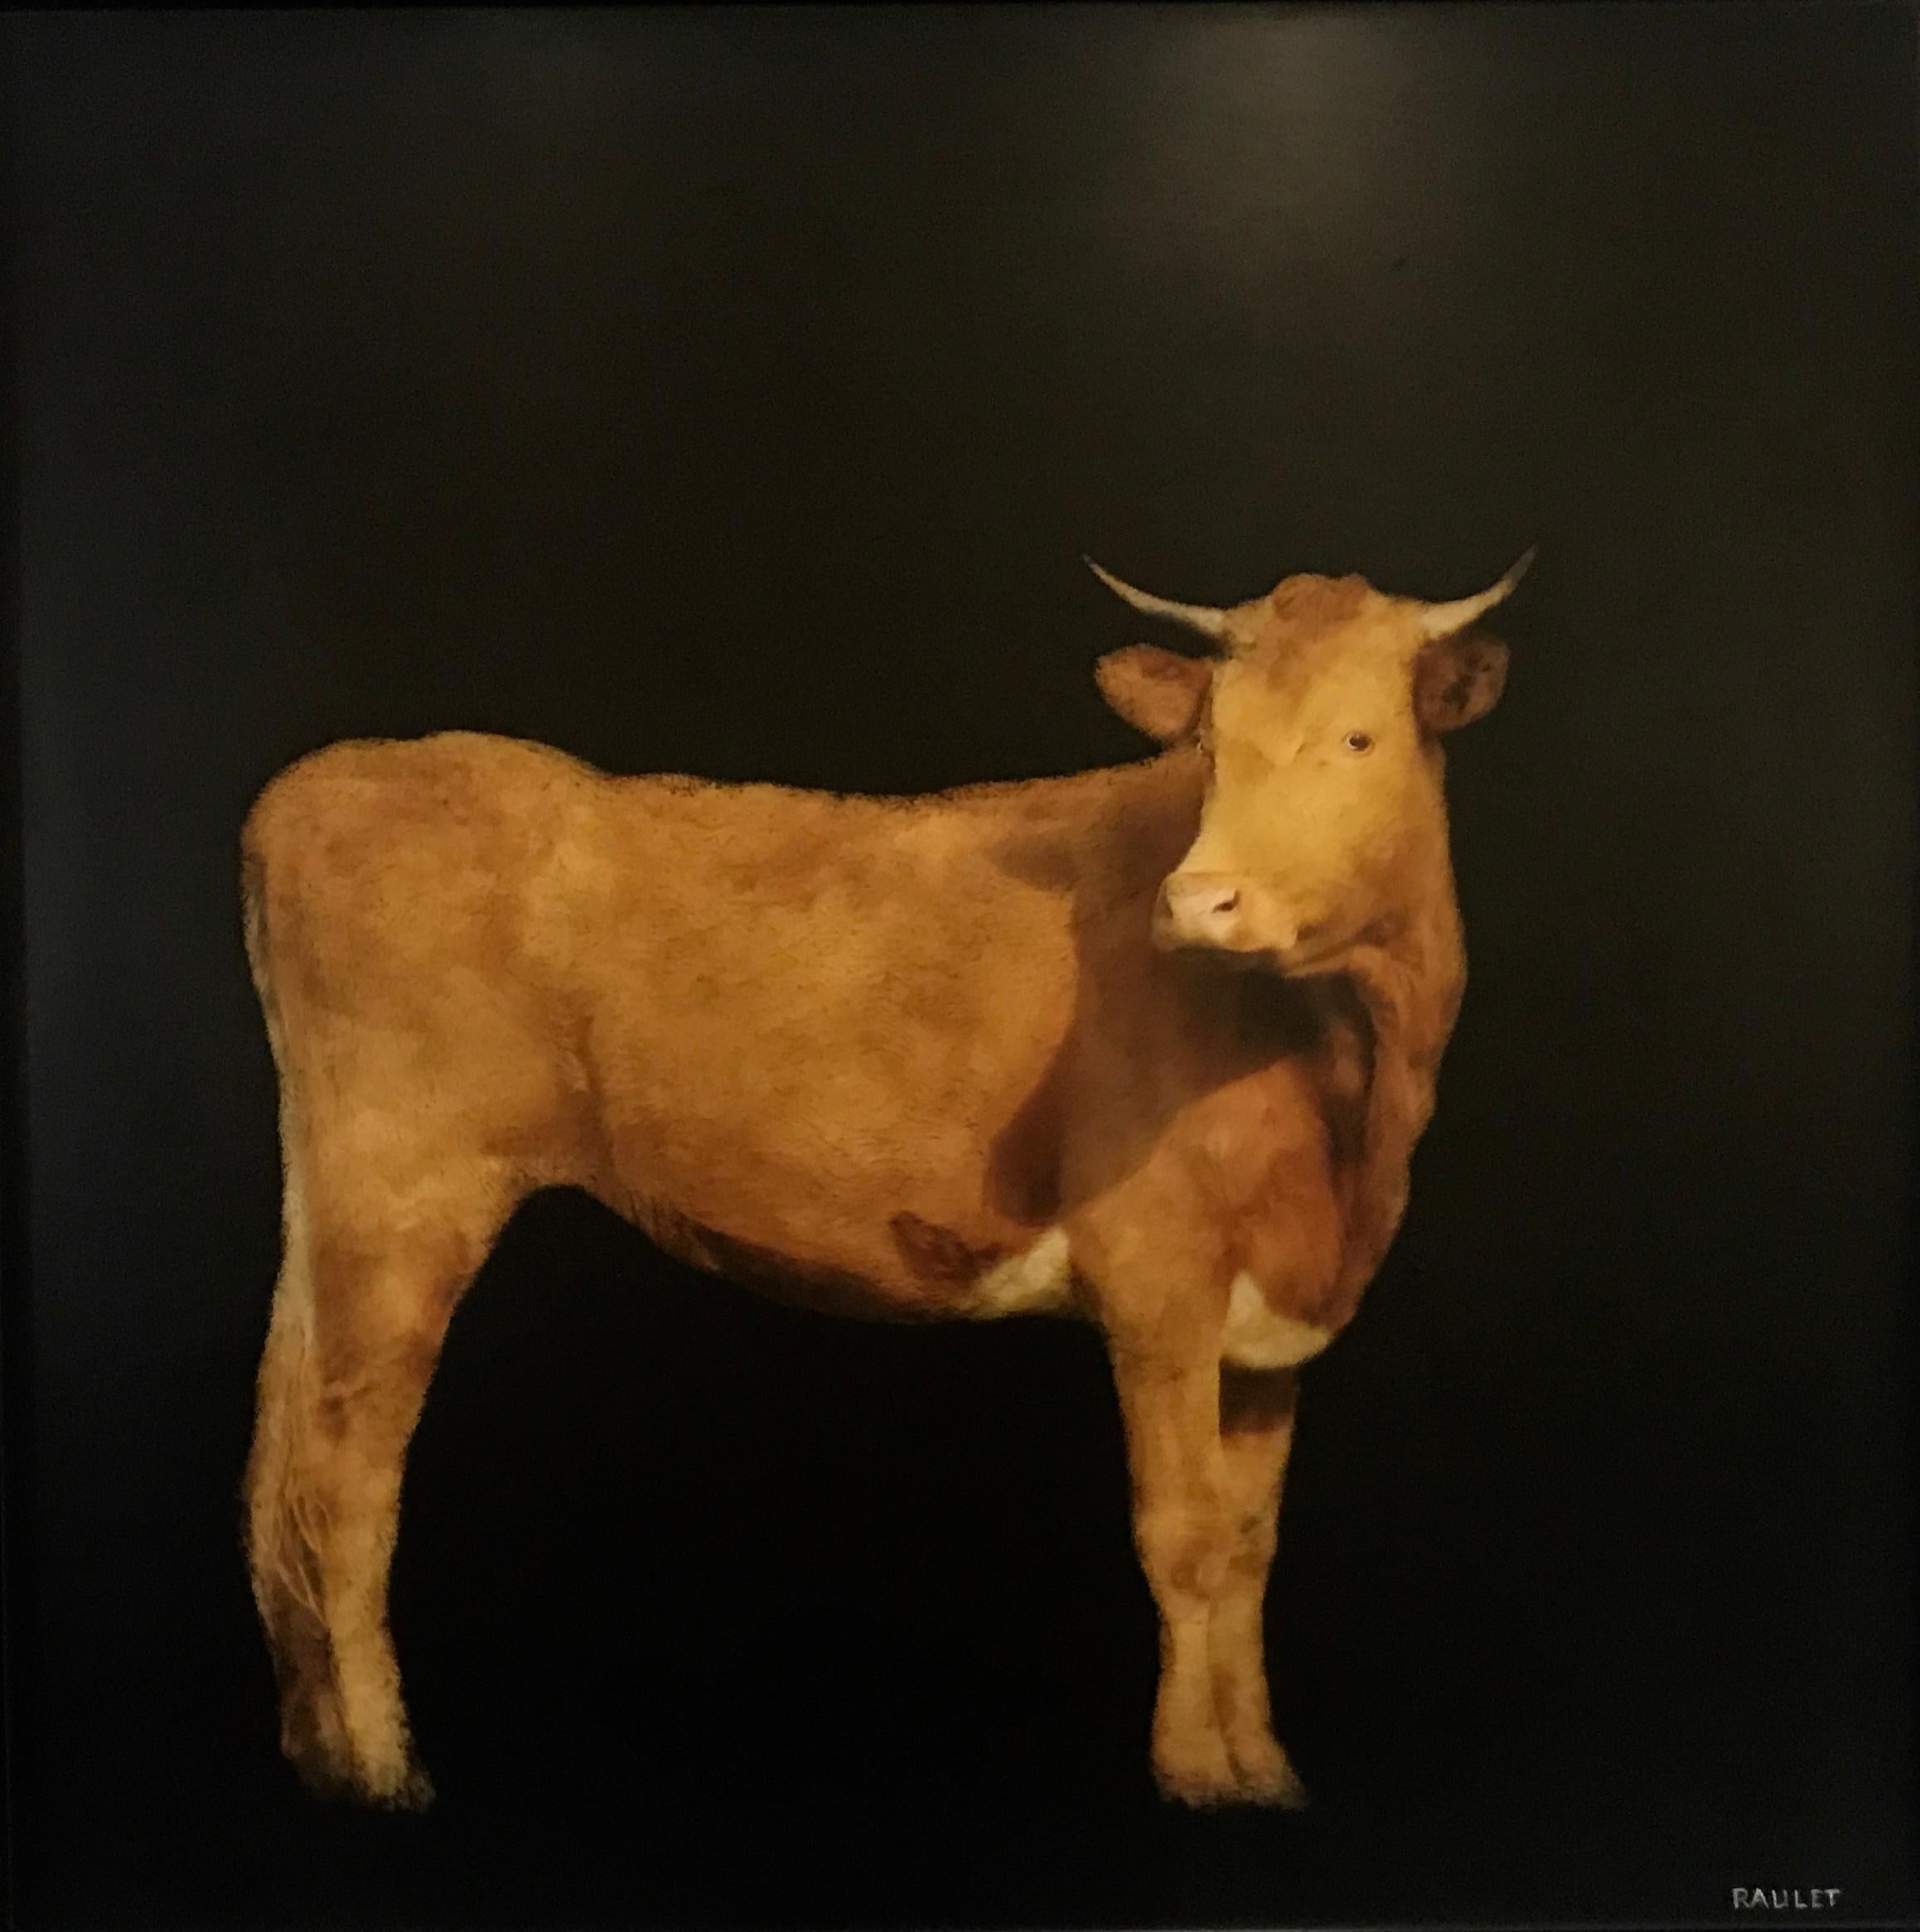 'Brown Cow' is a framed medium size contemporary mixed media on board figurative painting created by American artist Dawne Raulet in 2018. Painted on a dark background that allows our eye to capture the scene beautifully, a cow is looking at us.